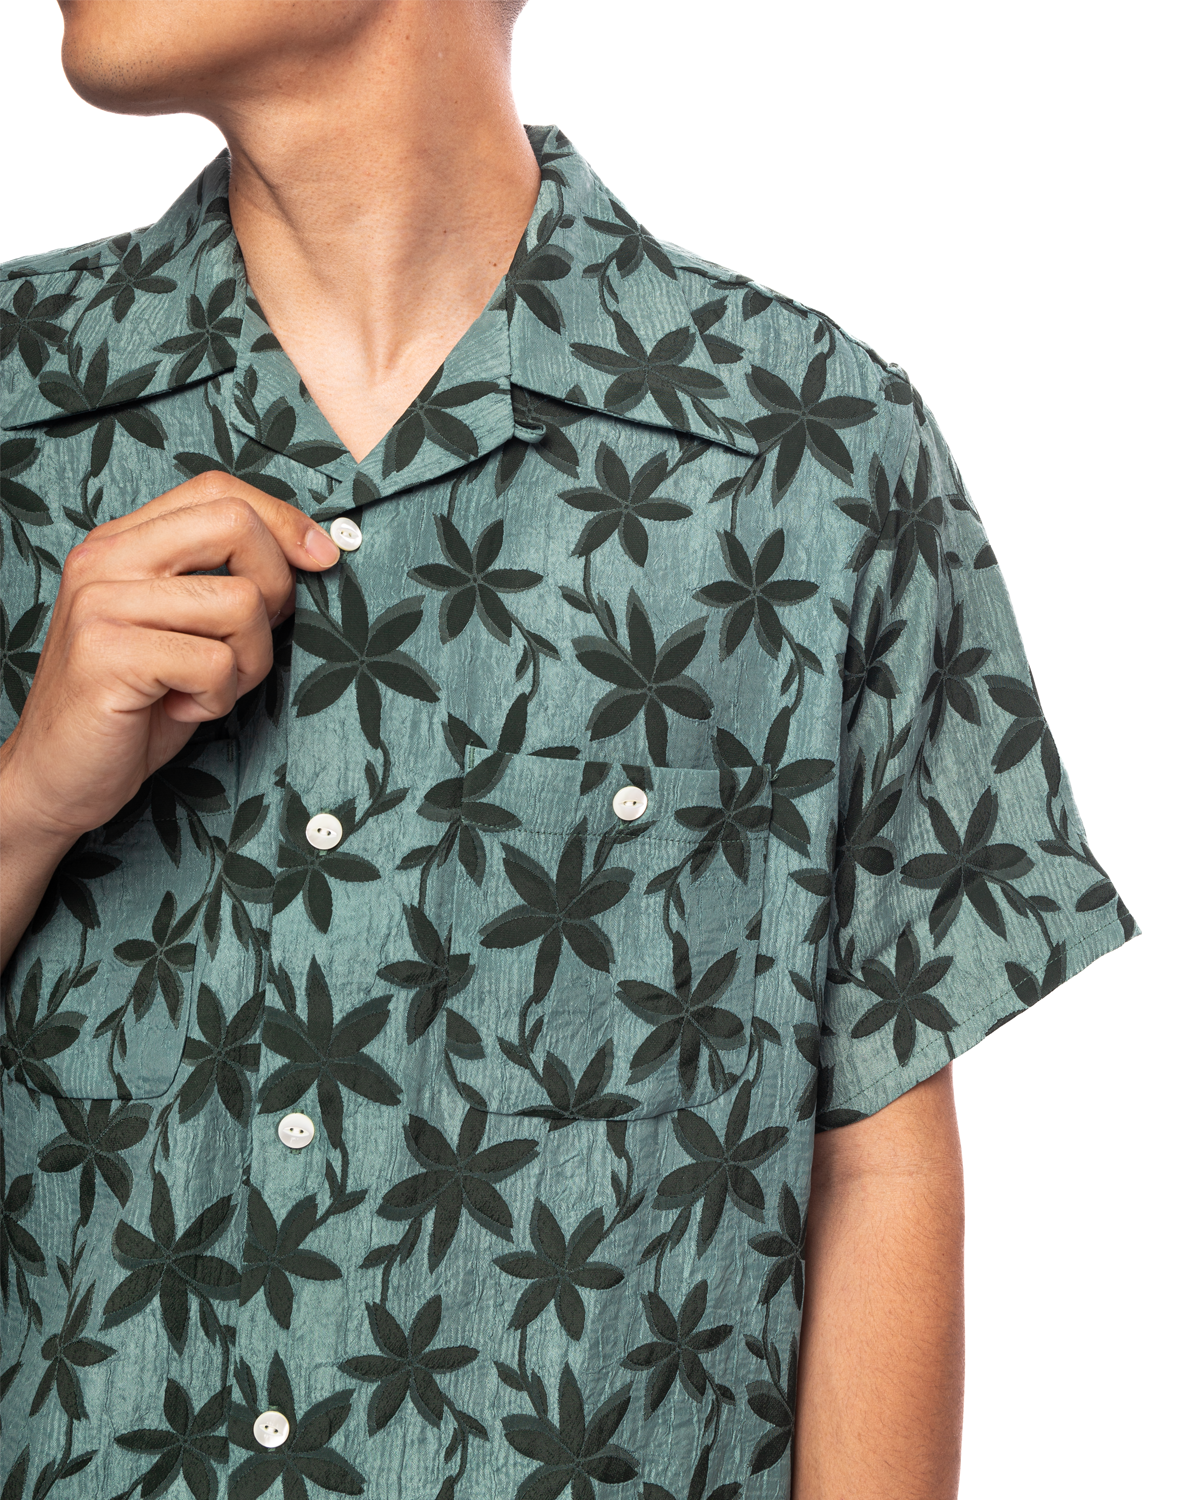 S/S One-Up Shirt - ACE/R Floral Jq Green